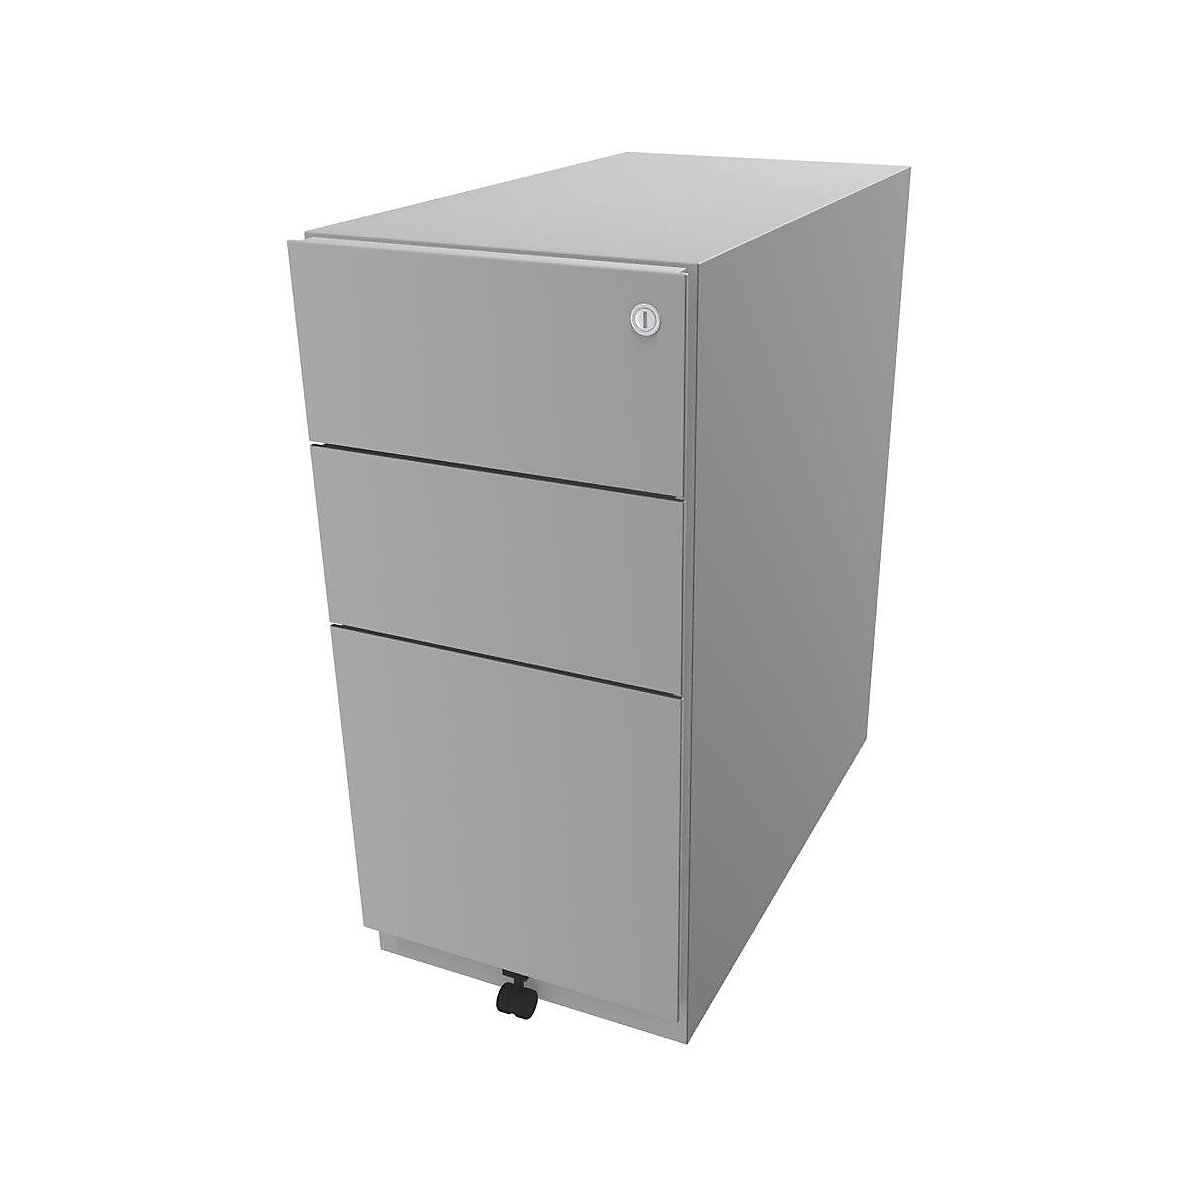 Note™ mobile drawer unit, with 2 universal drawers, 1 suspension file drawer – BISLEY, HxWxT 645 x 300 x 565 mm, light grey-1